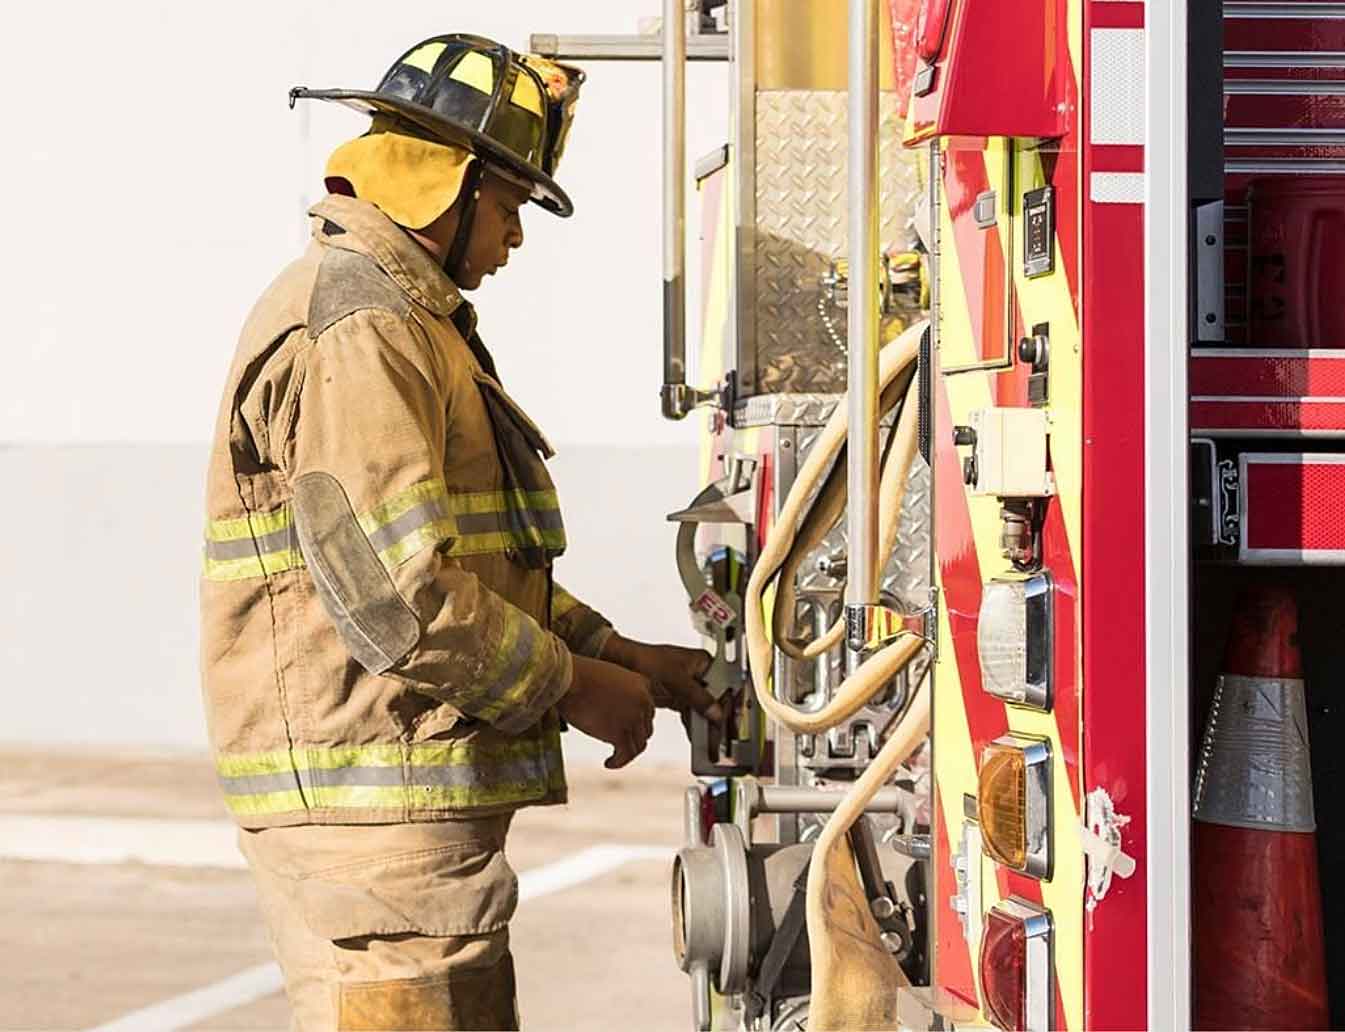 First responders always put the mission first. If you're an active, volunteer or retired first responder, you qualify for discounts and more. Learn More at https://www.verizonenterprise.com/industry/public_sector/public_safety/campaigns/volunteer_first_responders/. (Courtesy of Verizon)